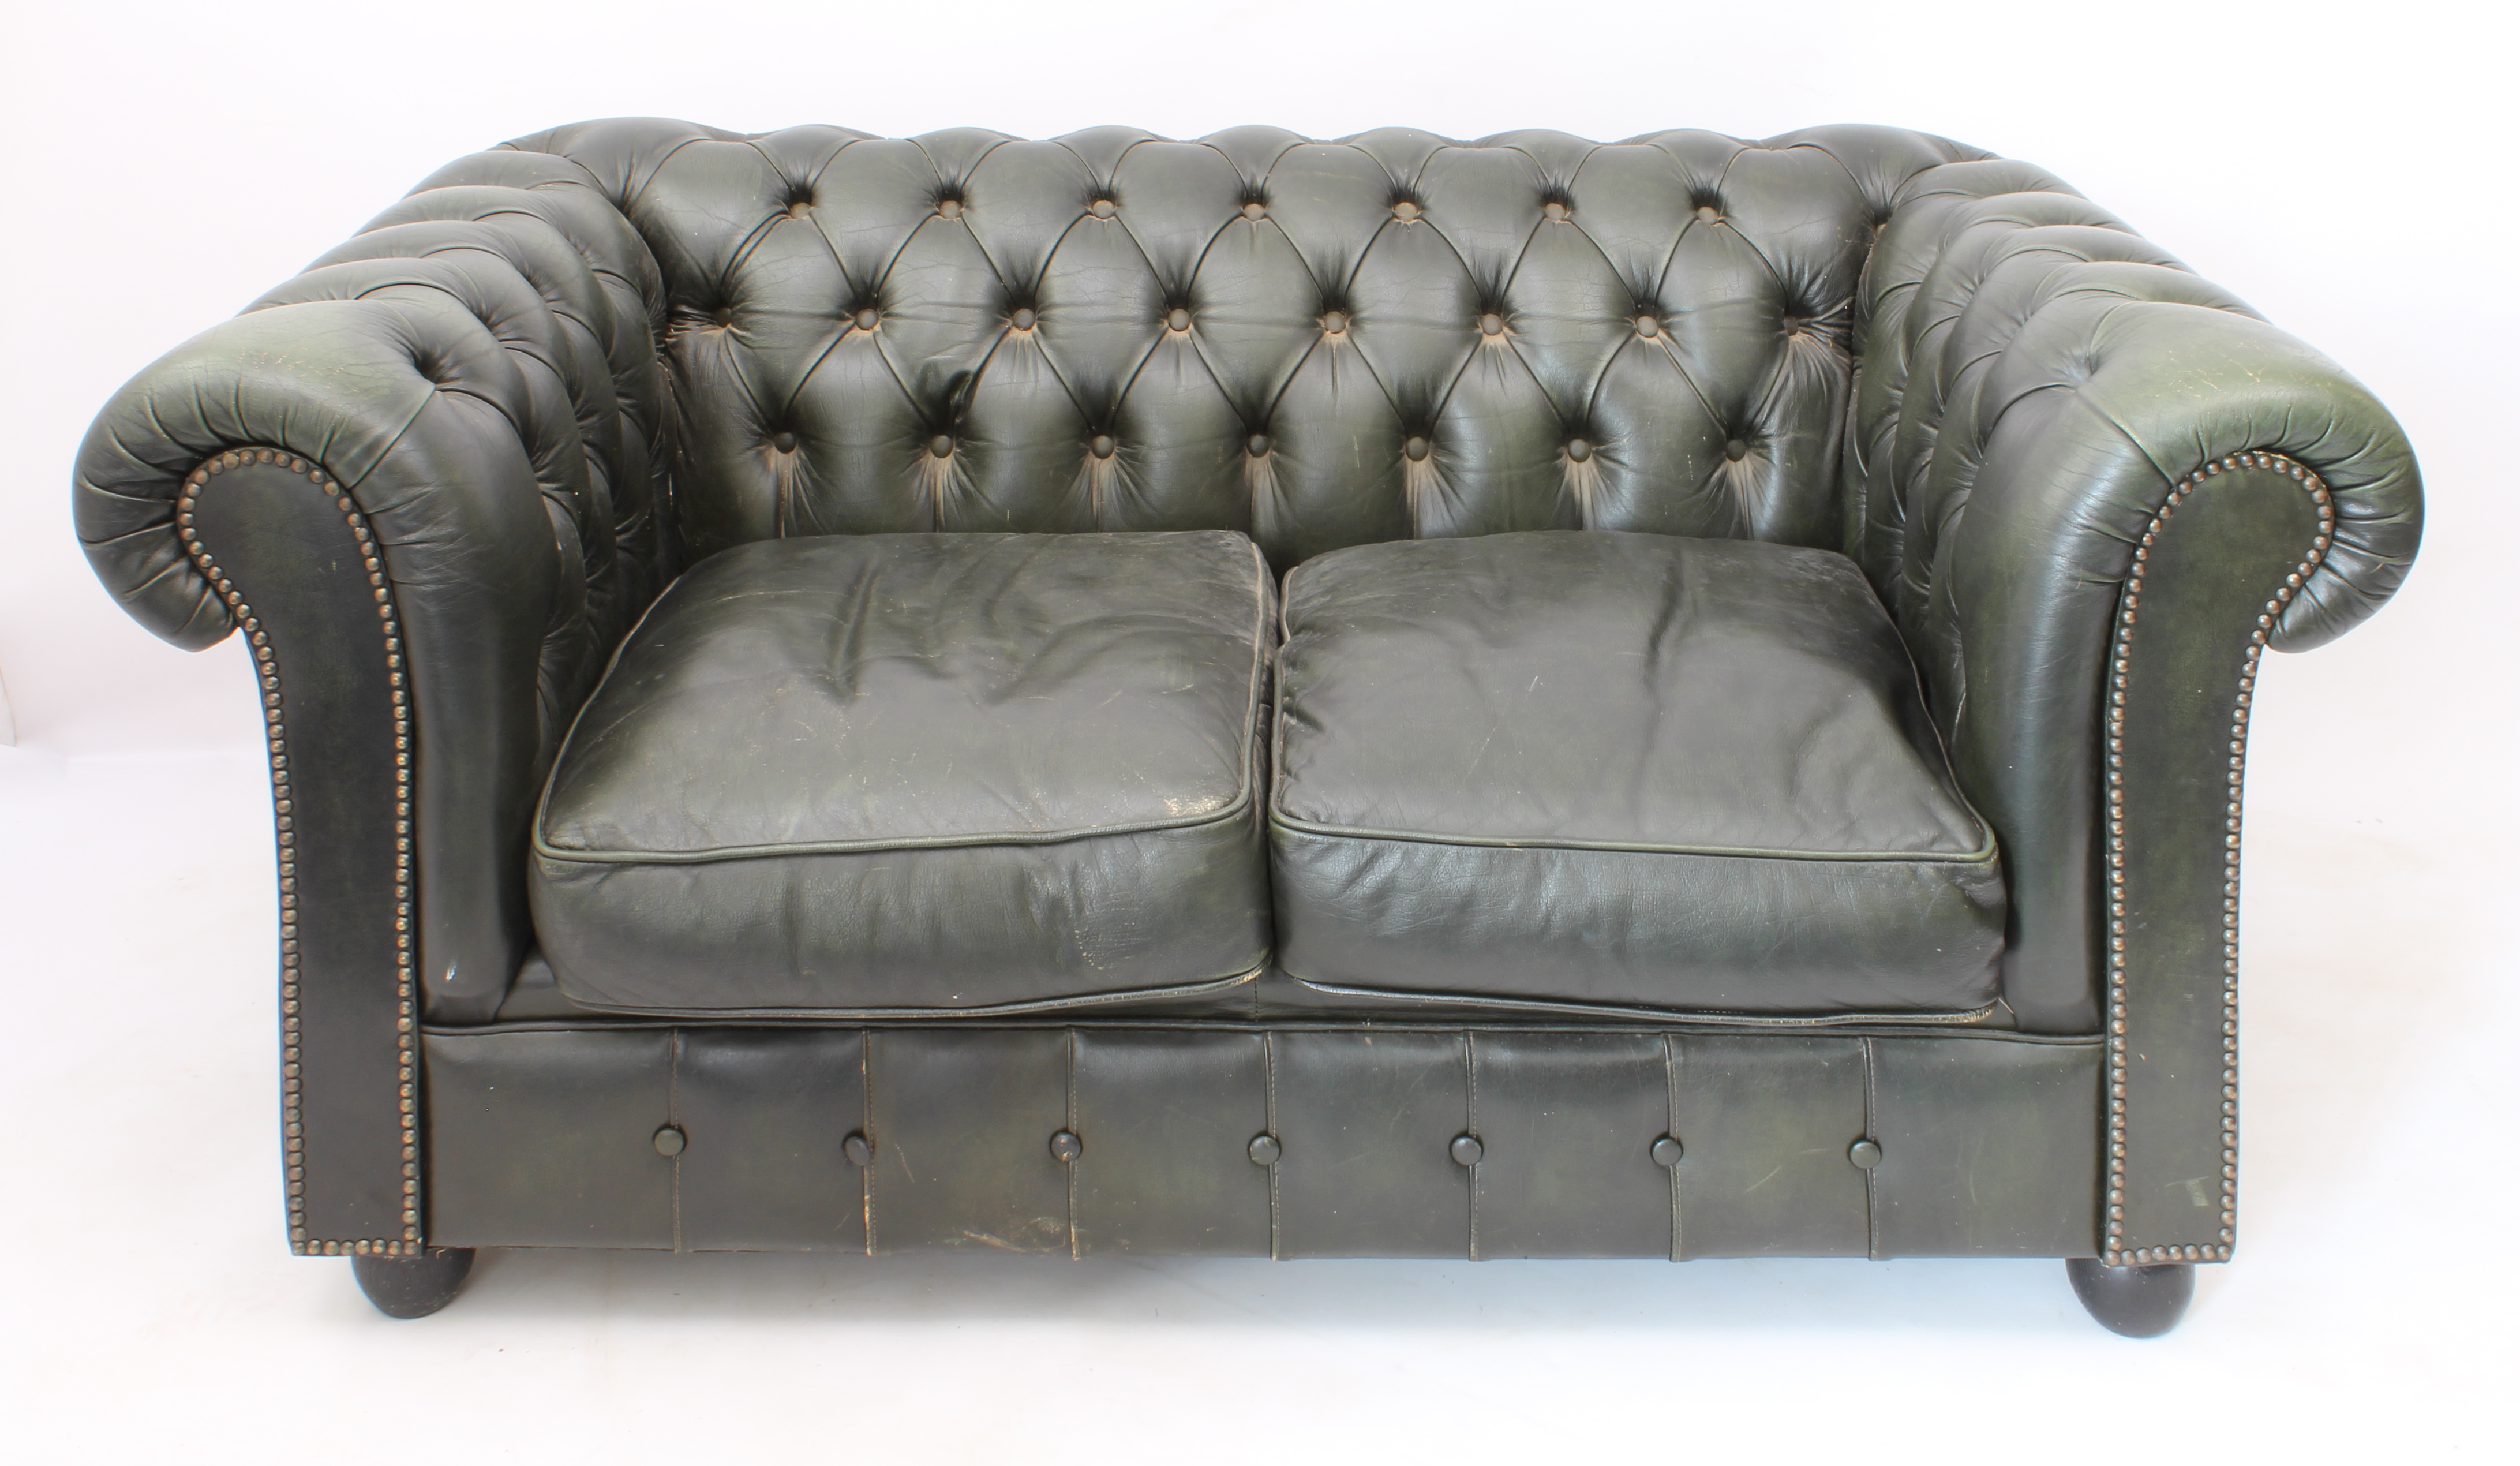 A green leather two-seater Chesterfield sofa - raised on four bun feet (LWH 148 x 87 x 71 cm)